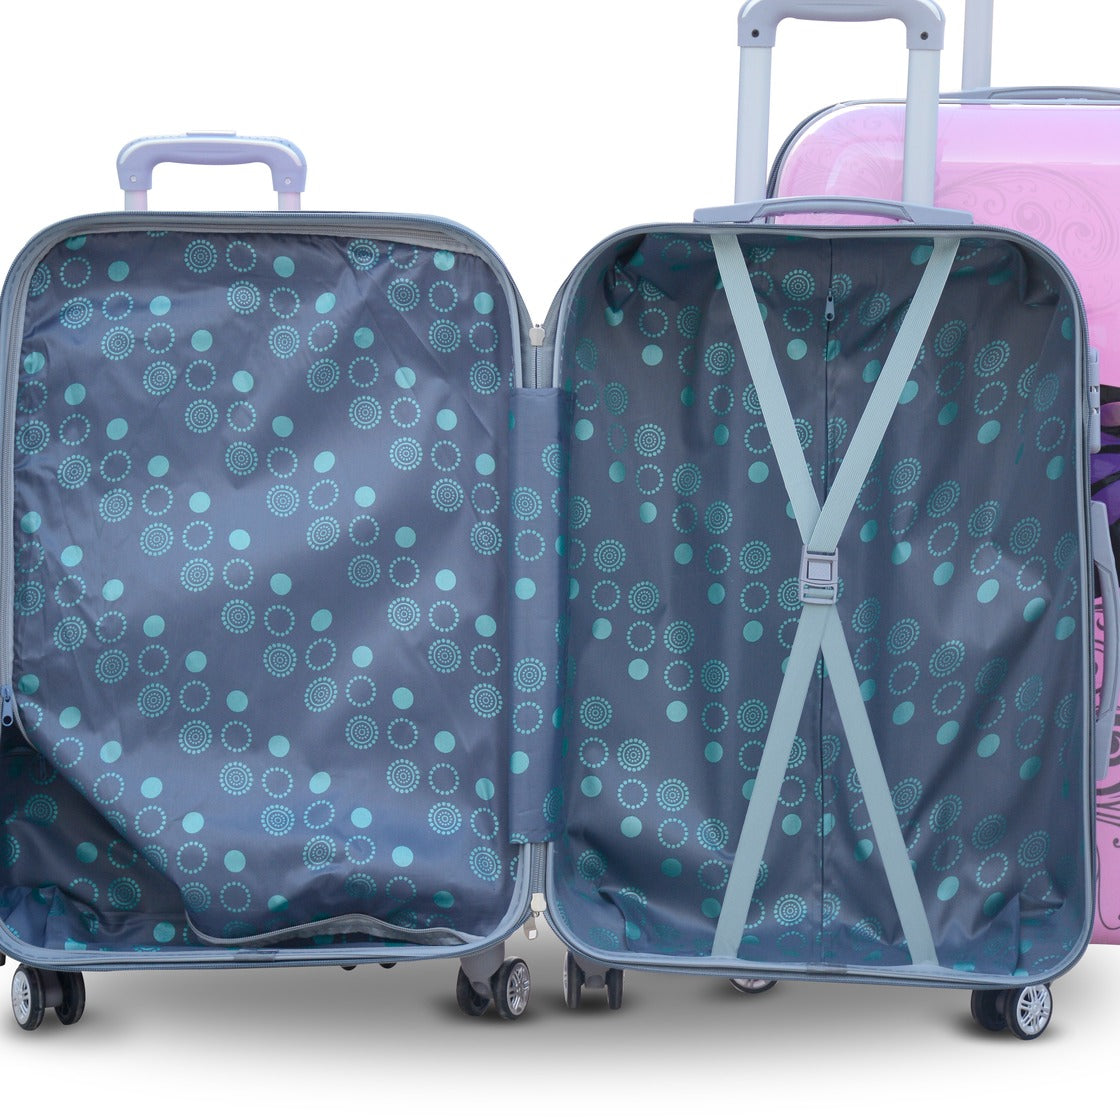 28" Pink Colour Printed Butterfly ABS Luggage Lightweight Hard Case Trolley Bag